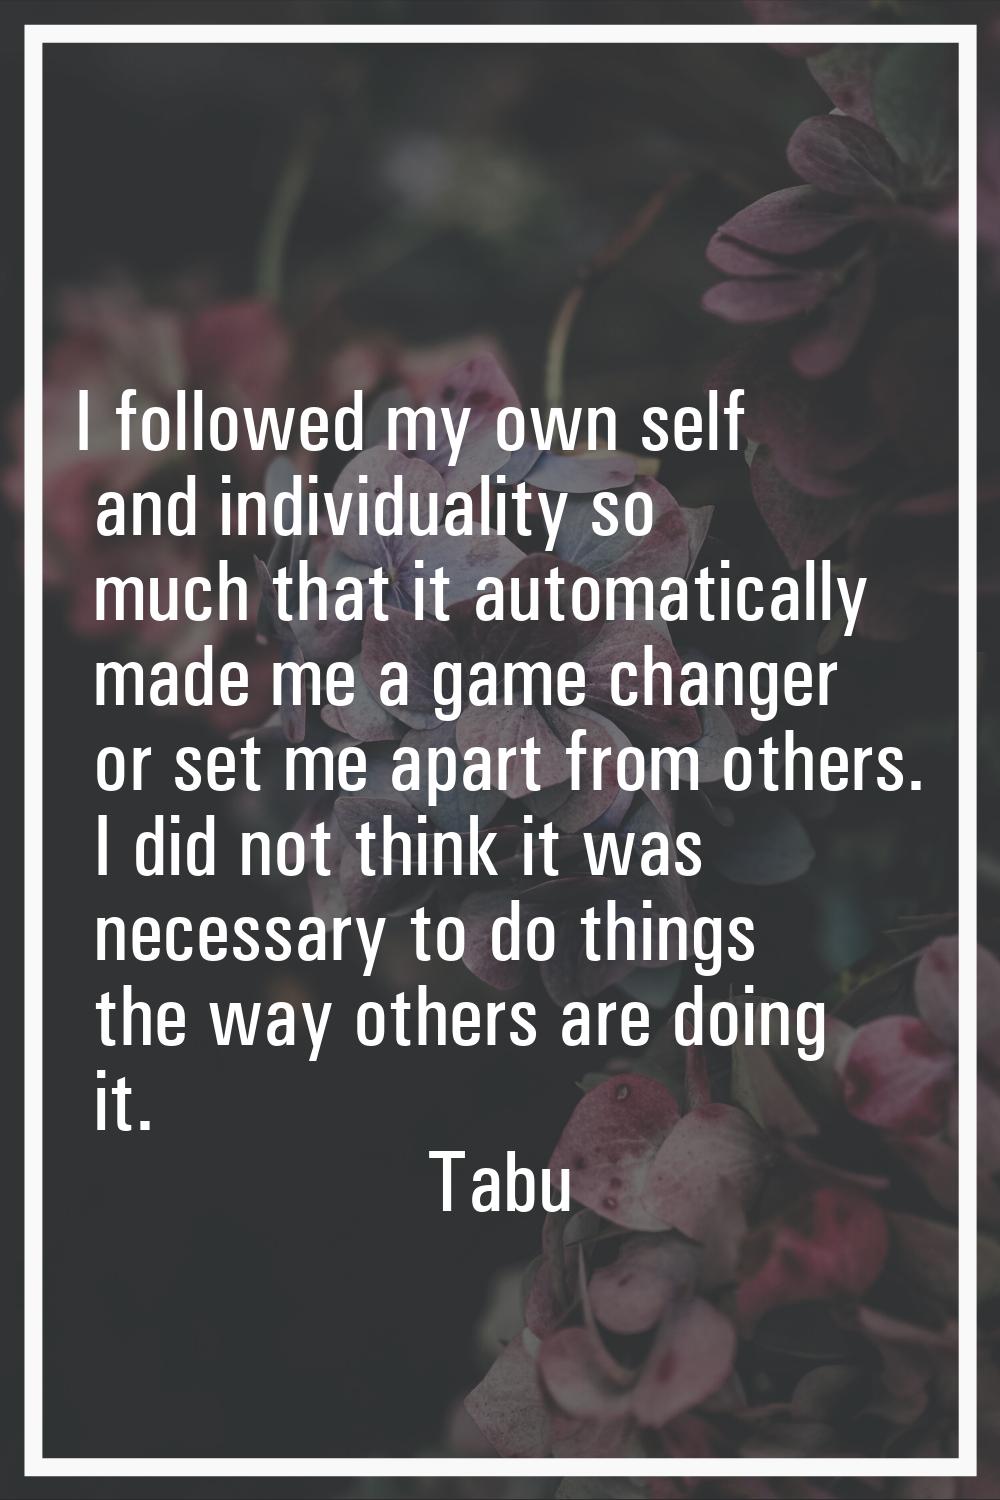 I followed my own self and individuality so much that it automatically made me a game changer or se